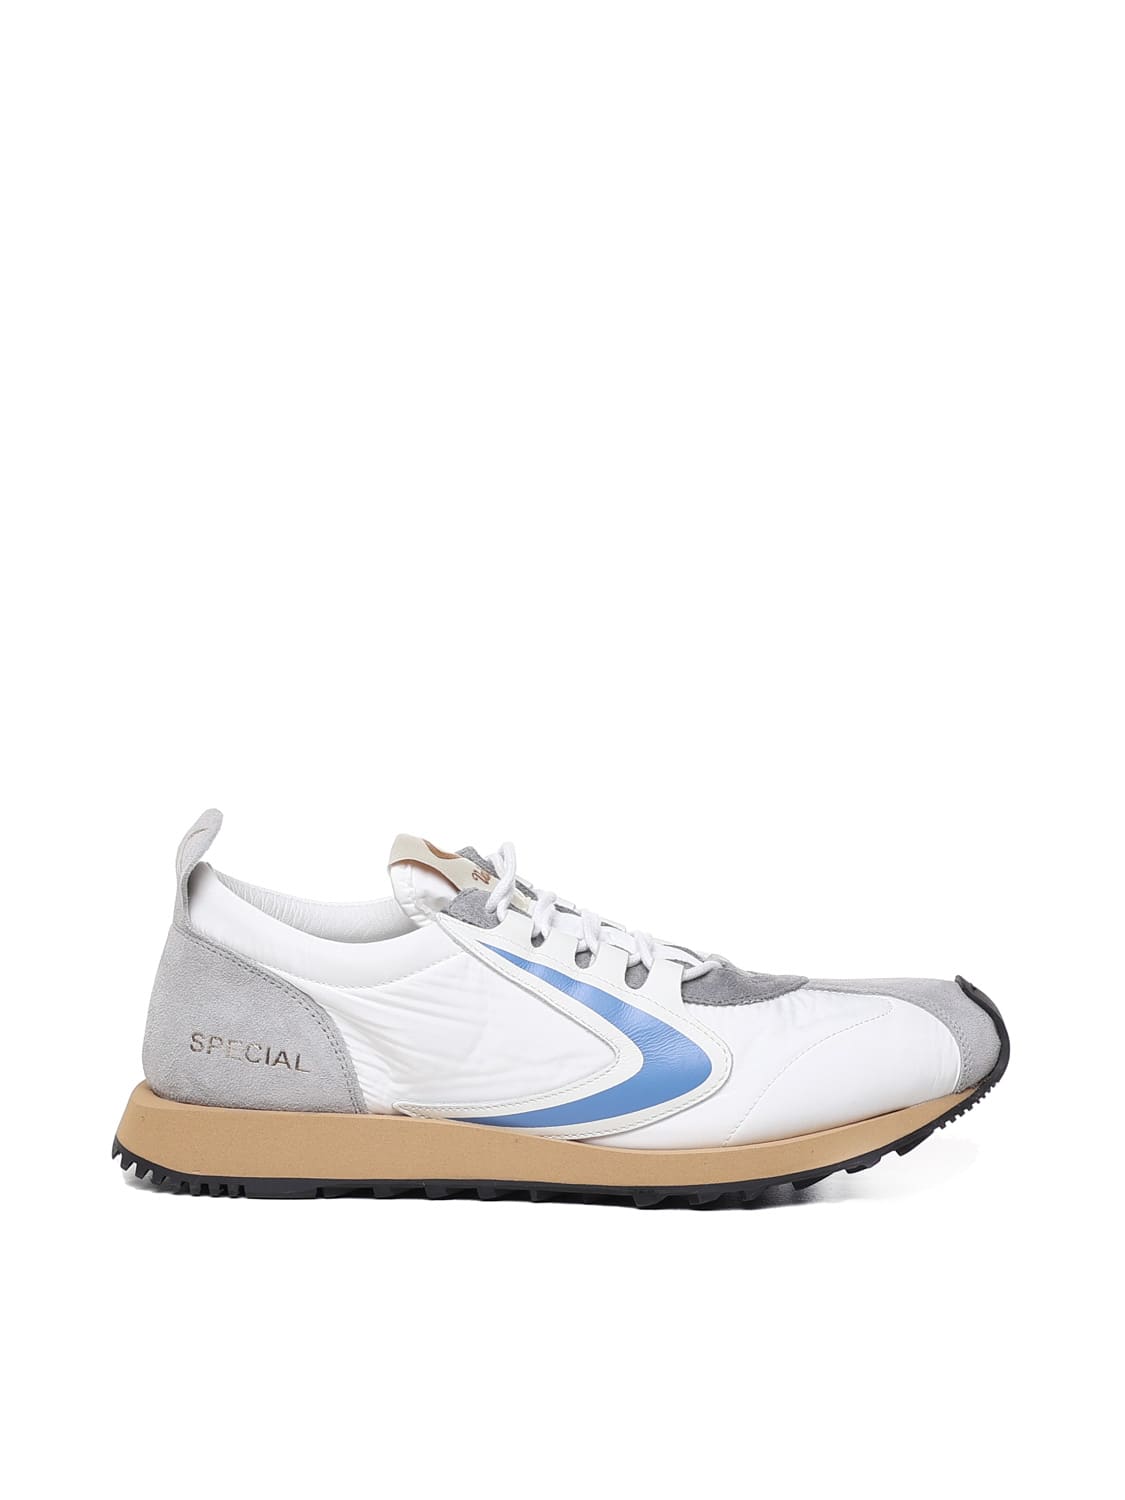 Valsport Special 16 Sneakers In White, Grey, Light Blue